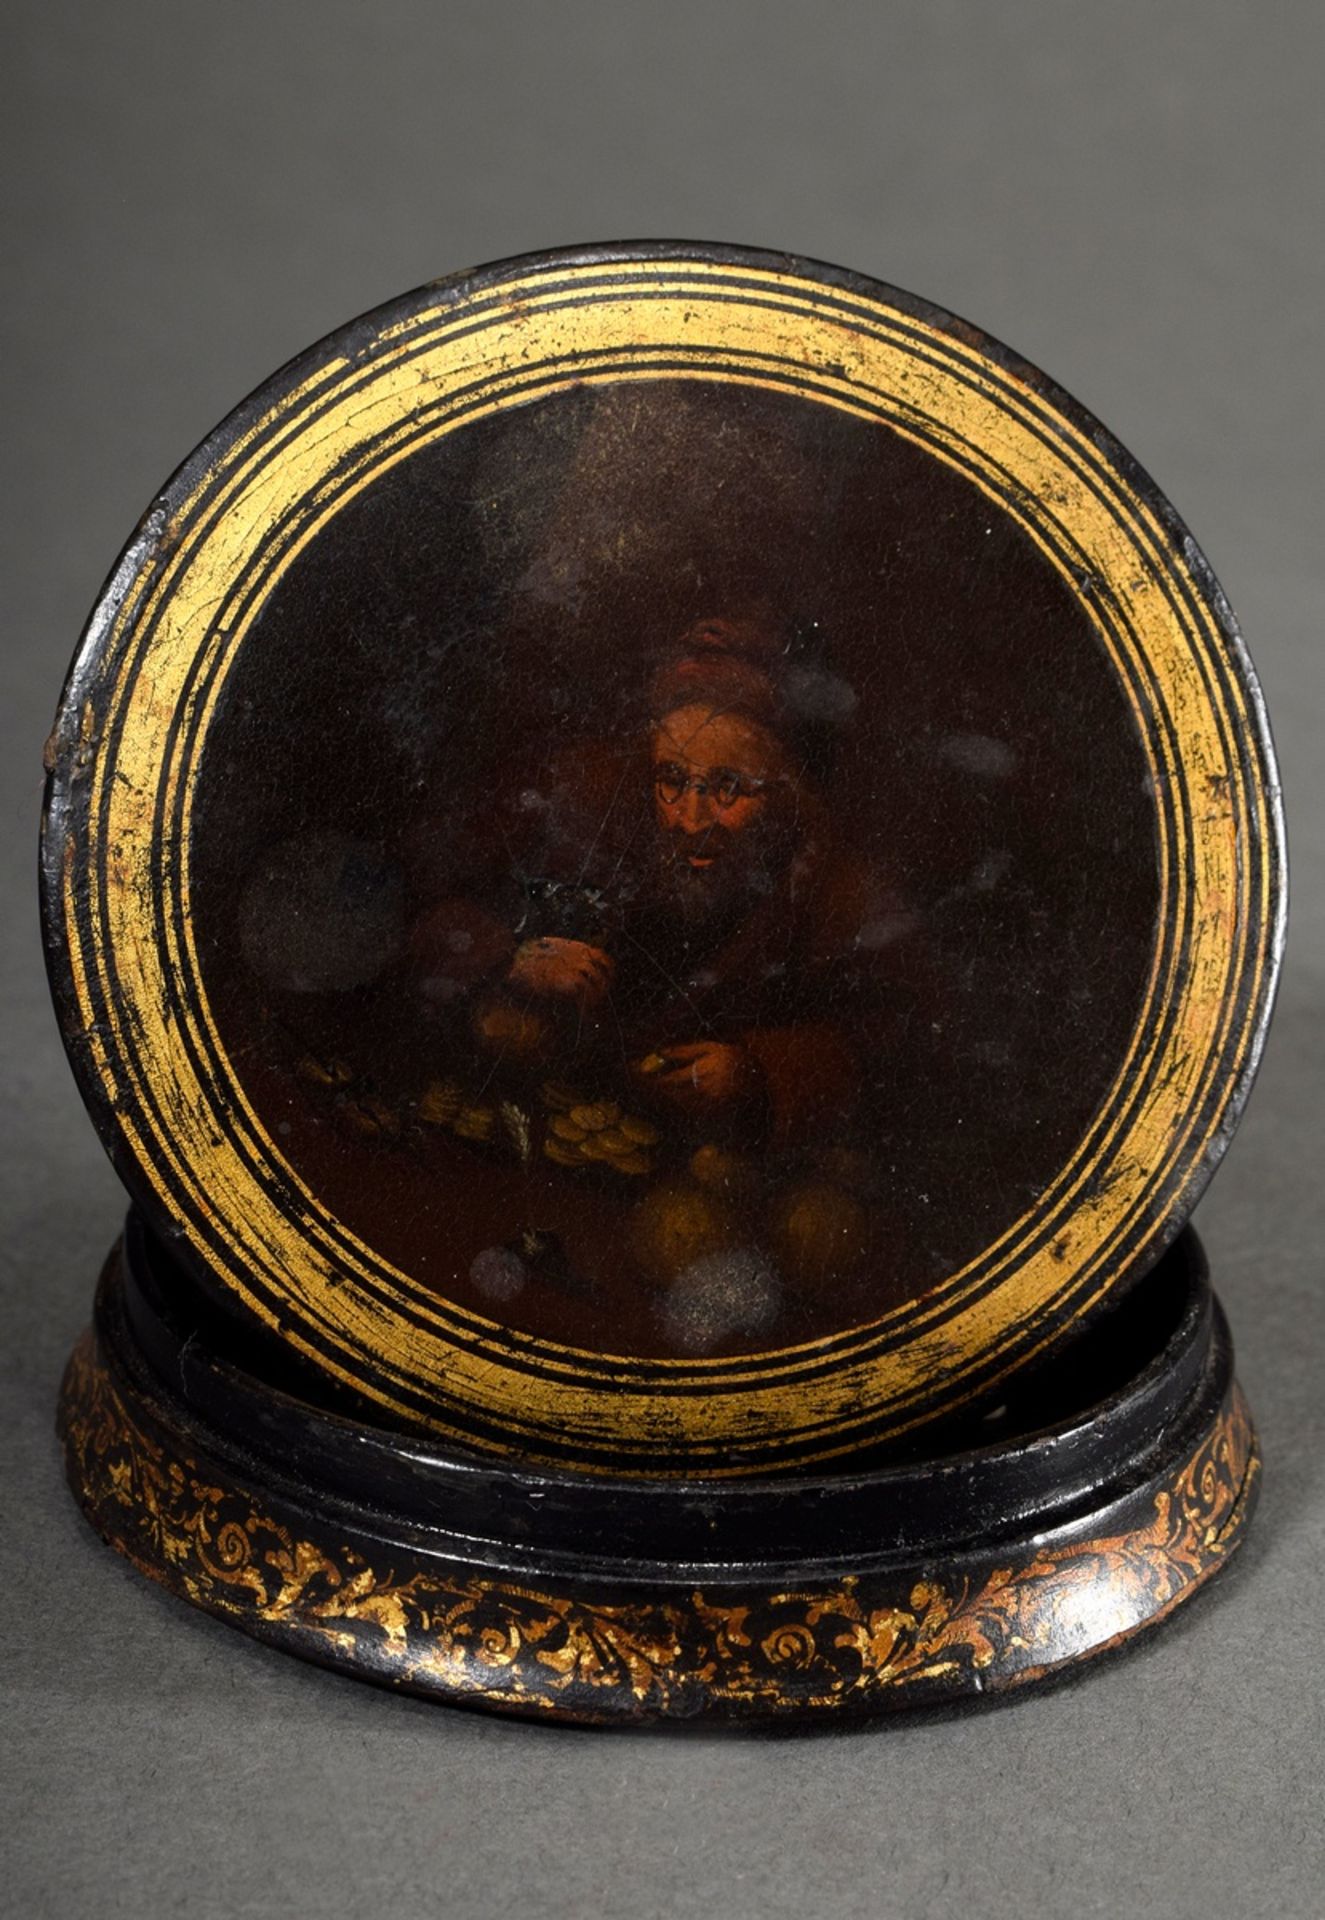 Round lacquer box with fine painting "money counter" on the lid and gold staffage, probably Stobwas